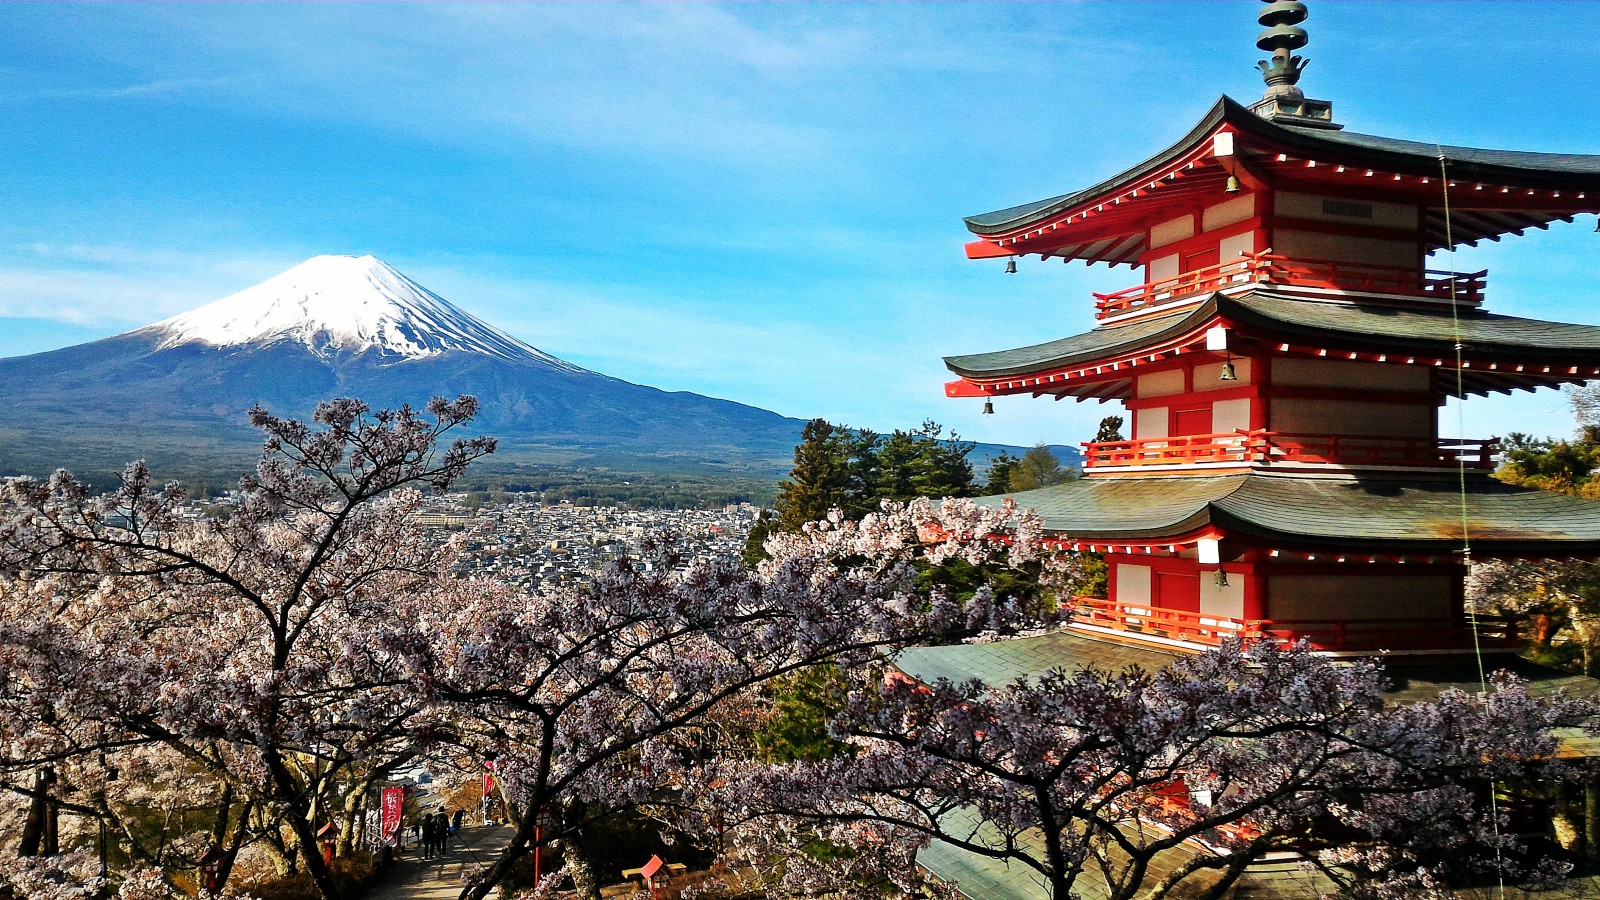 Chureito Pagoda: The Best View Point of Mt Fuji